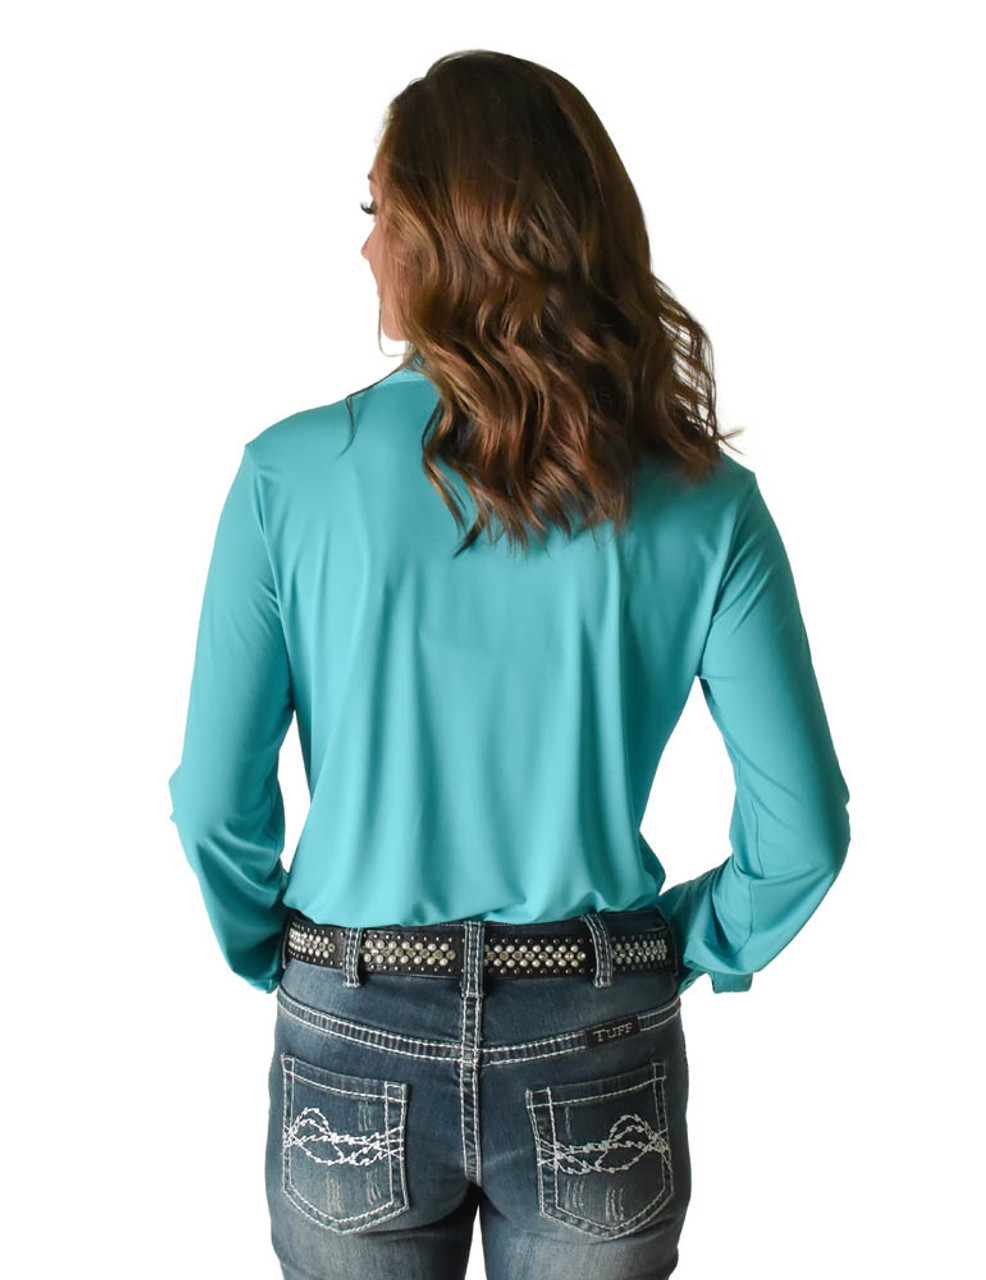 Breathe Instant Cooling pullover button up (turquoise) - Cowgirl Tuff Co. &  B. Tuff Jeans